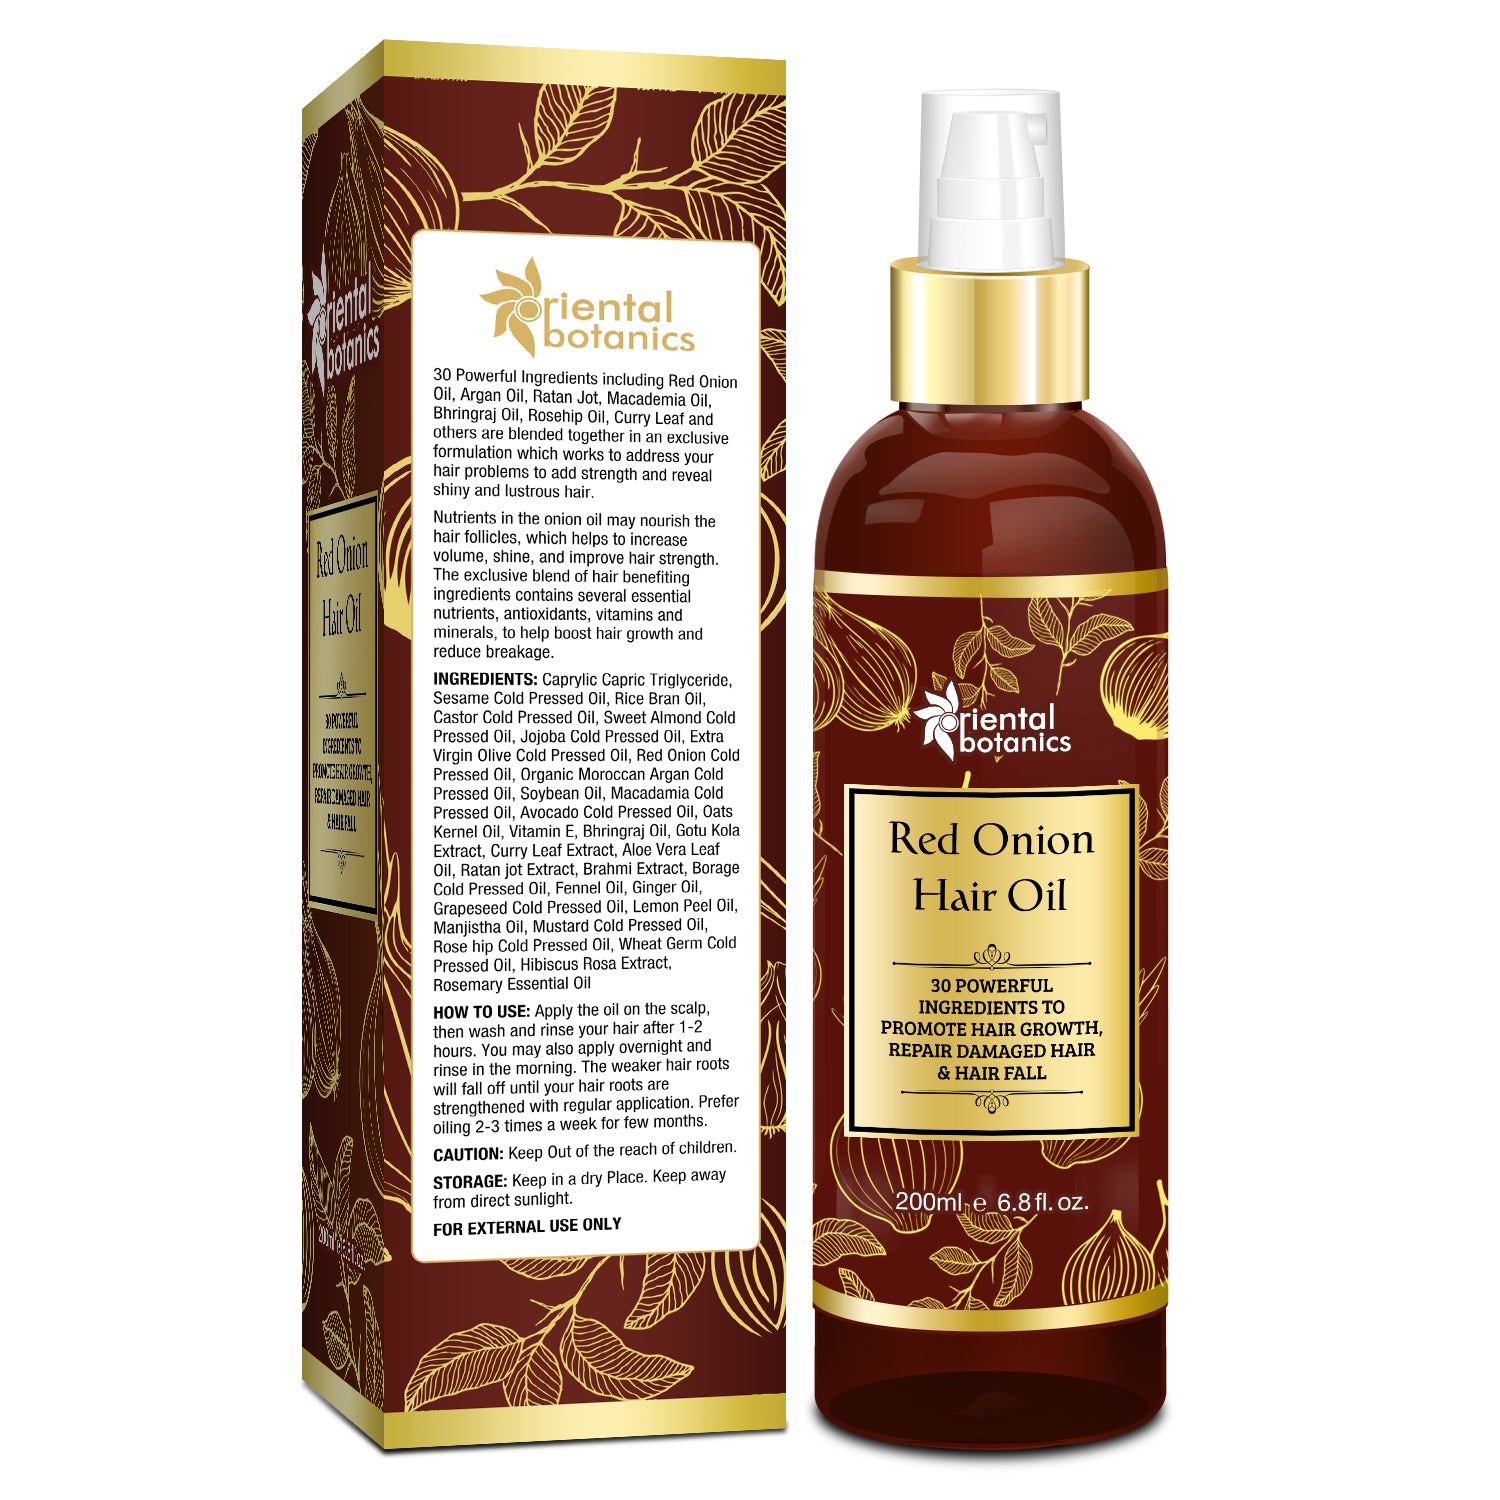 Oriental Botanics Red Onion Hair Oil with Comb Applicator 200ml - With 30 Oils & Extracts for Stronger Growth, Control Hair Fall